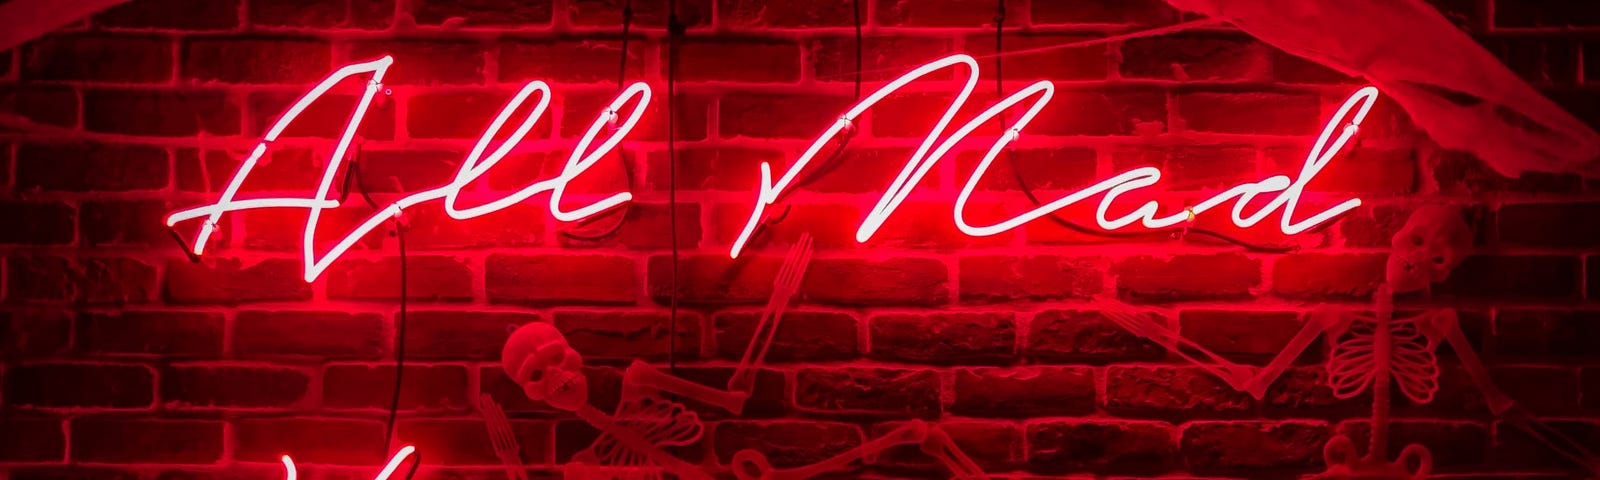 A red neon sign hanging on a brown brick wall. It says “All Mad Here”. A skeleton which looks like a halloween decoration hangs in between in the words.